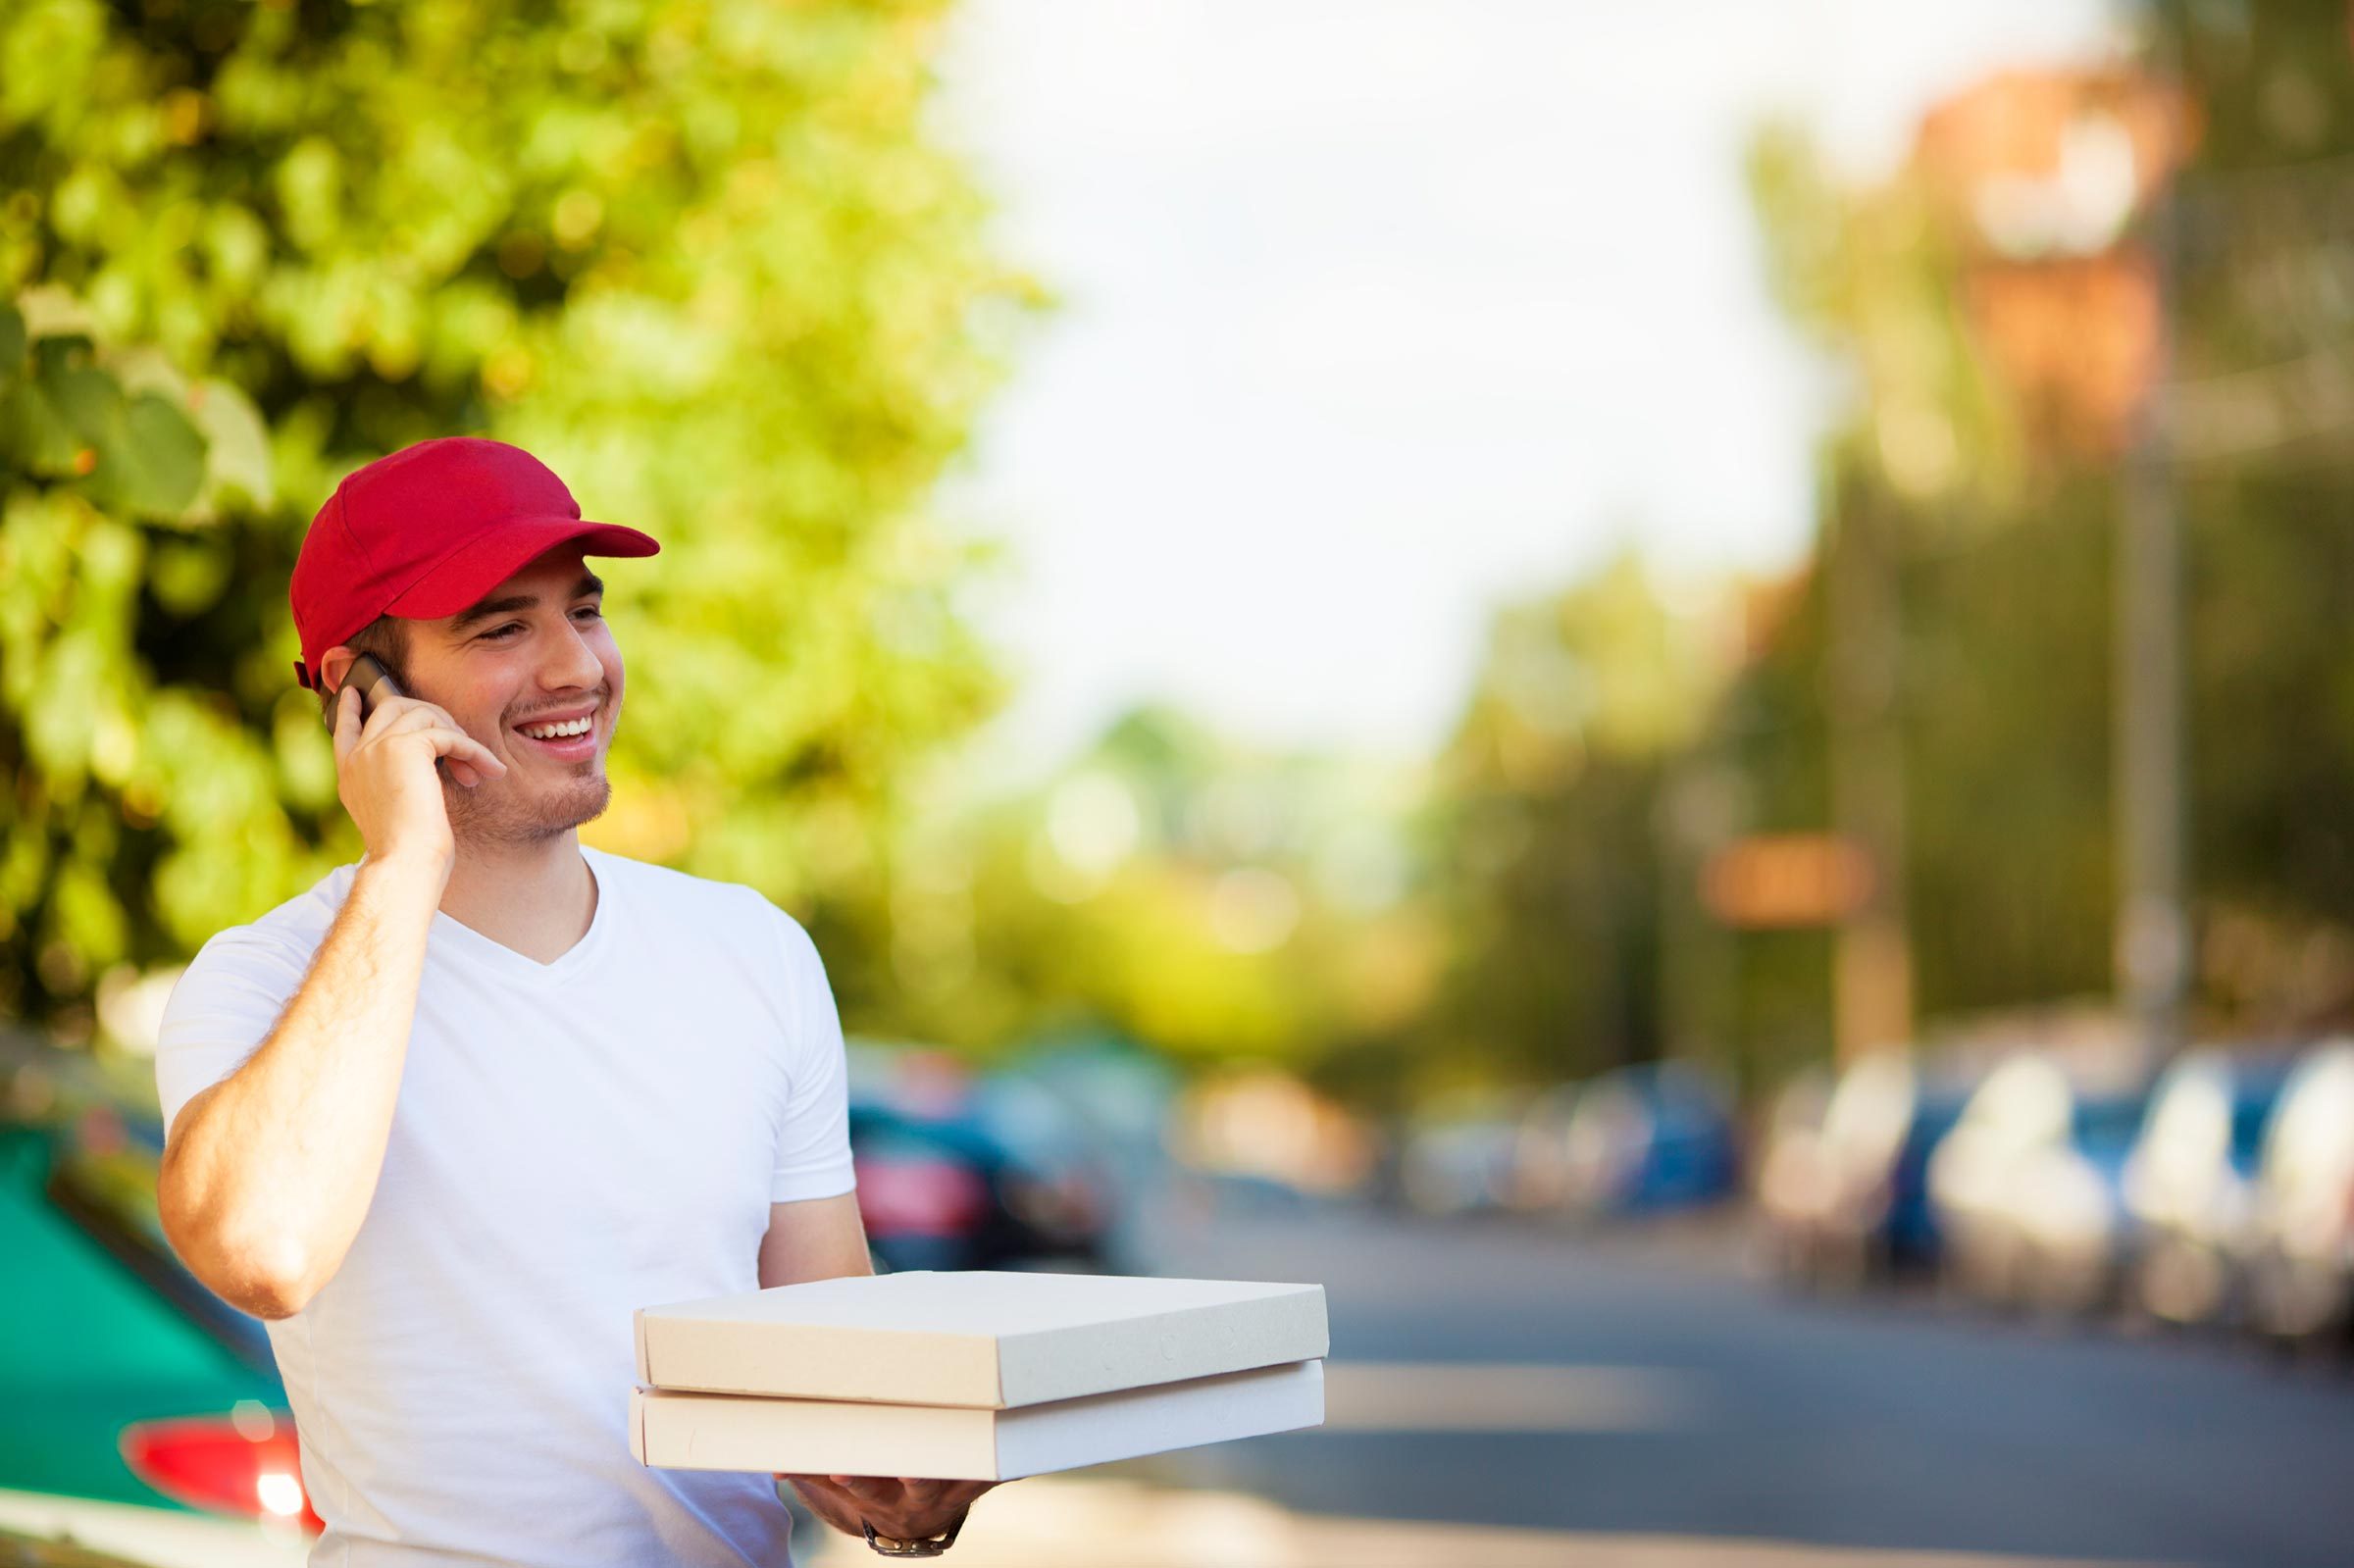 how much money does a pizza delivery person make